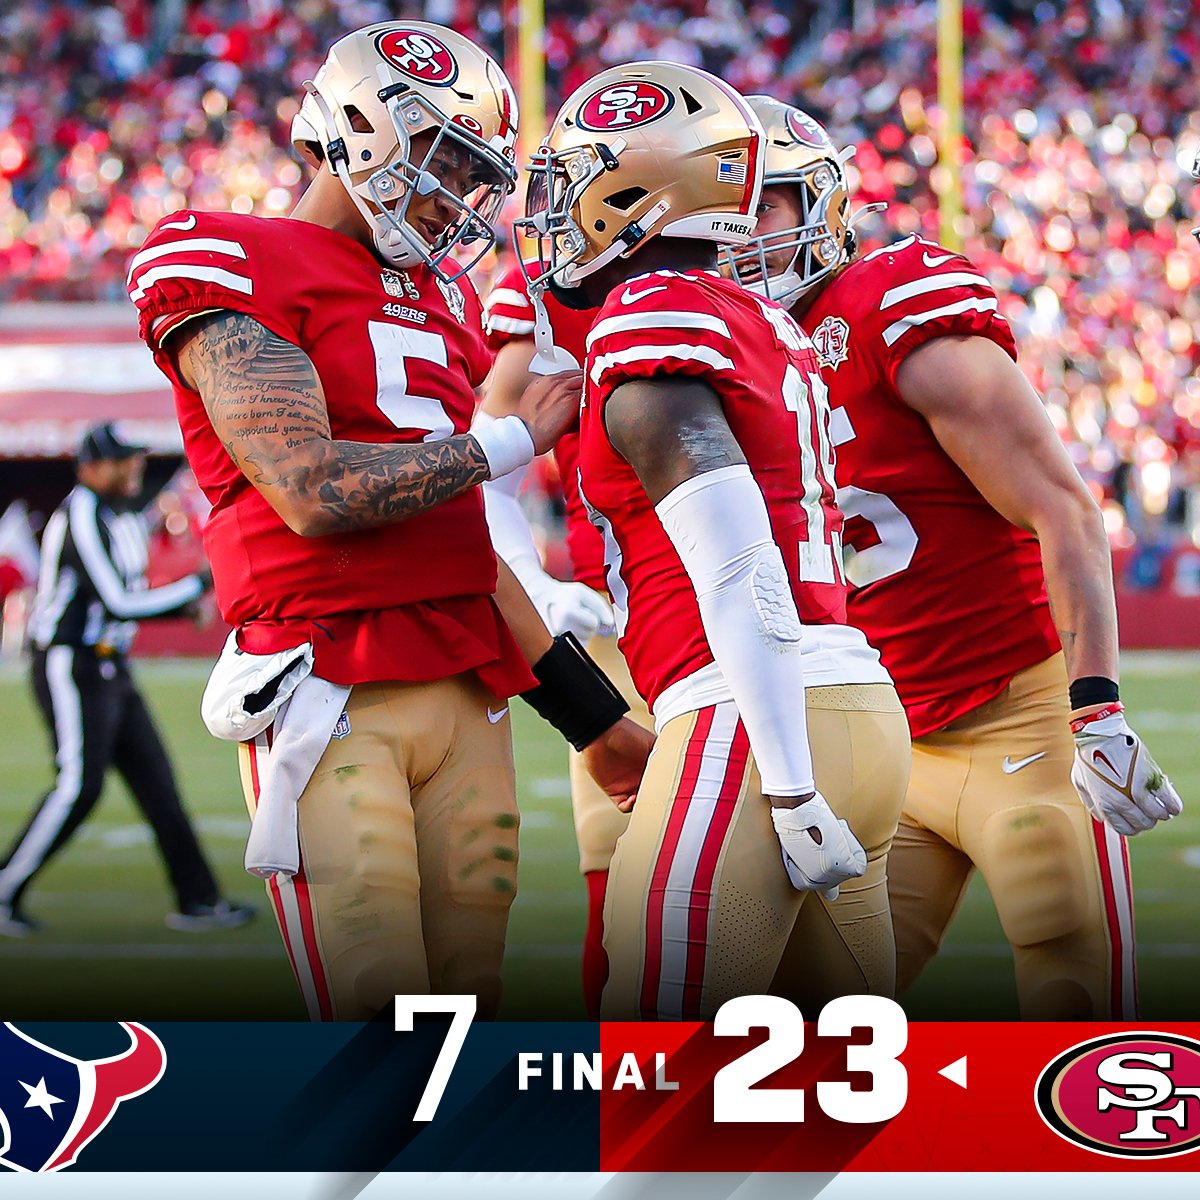 FINAL: @49ers improve to 9-7! #HOUvsSF #FTTB